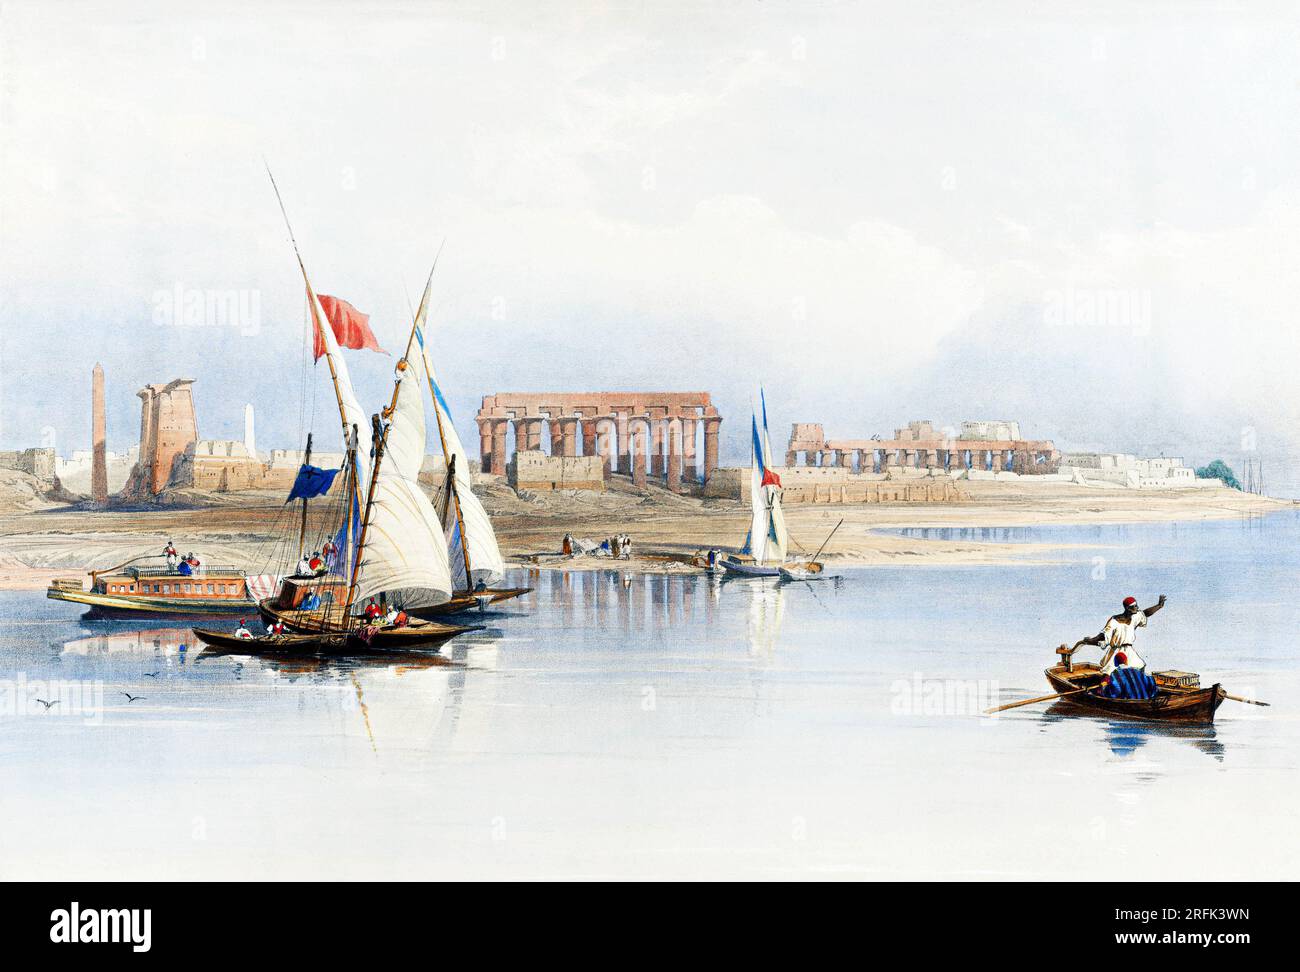 General view of the ruins of Luxor from the Nile illustration by David Roberts . Original from The New York Public Library. Stock Photo